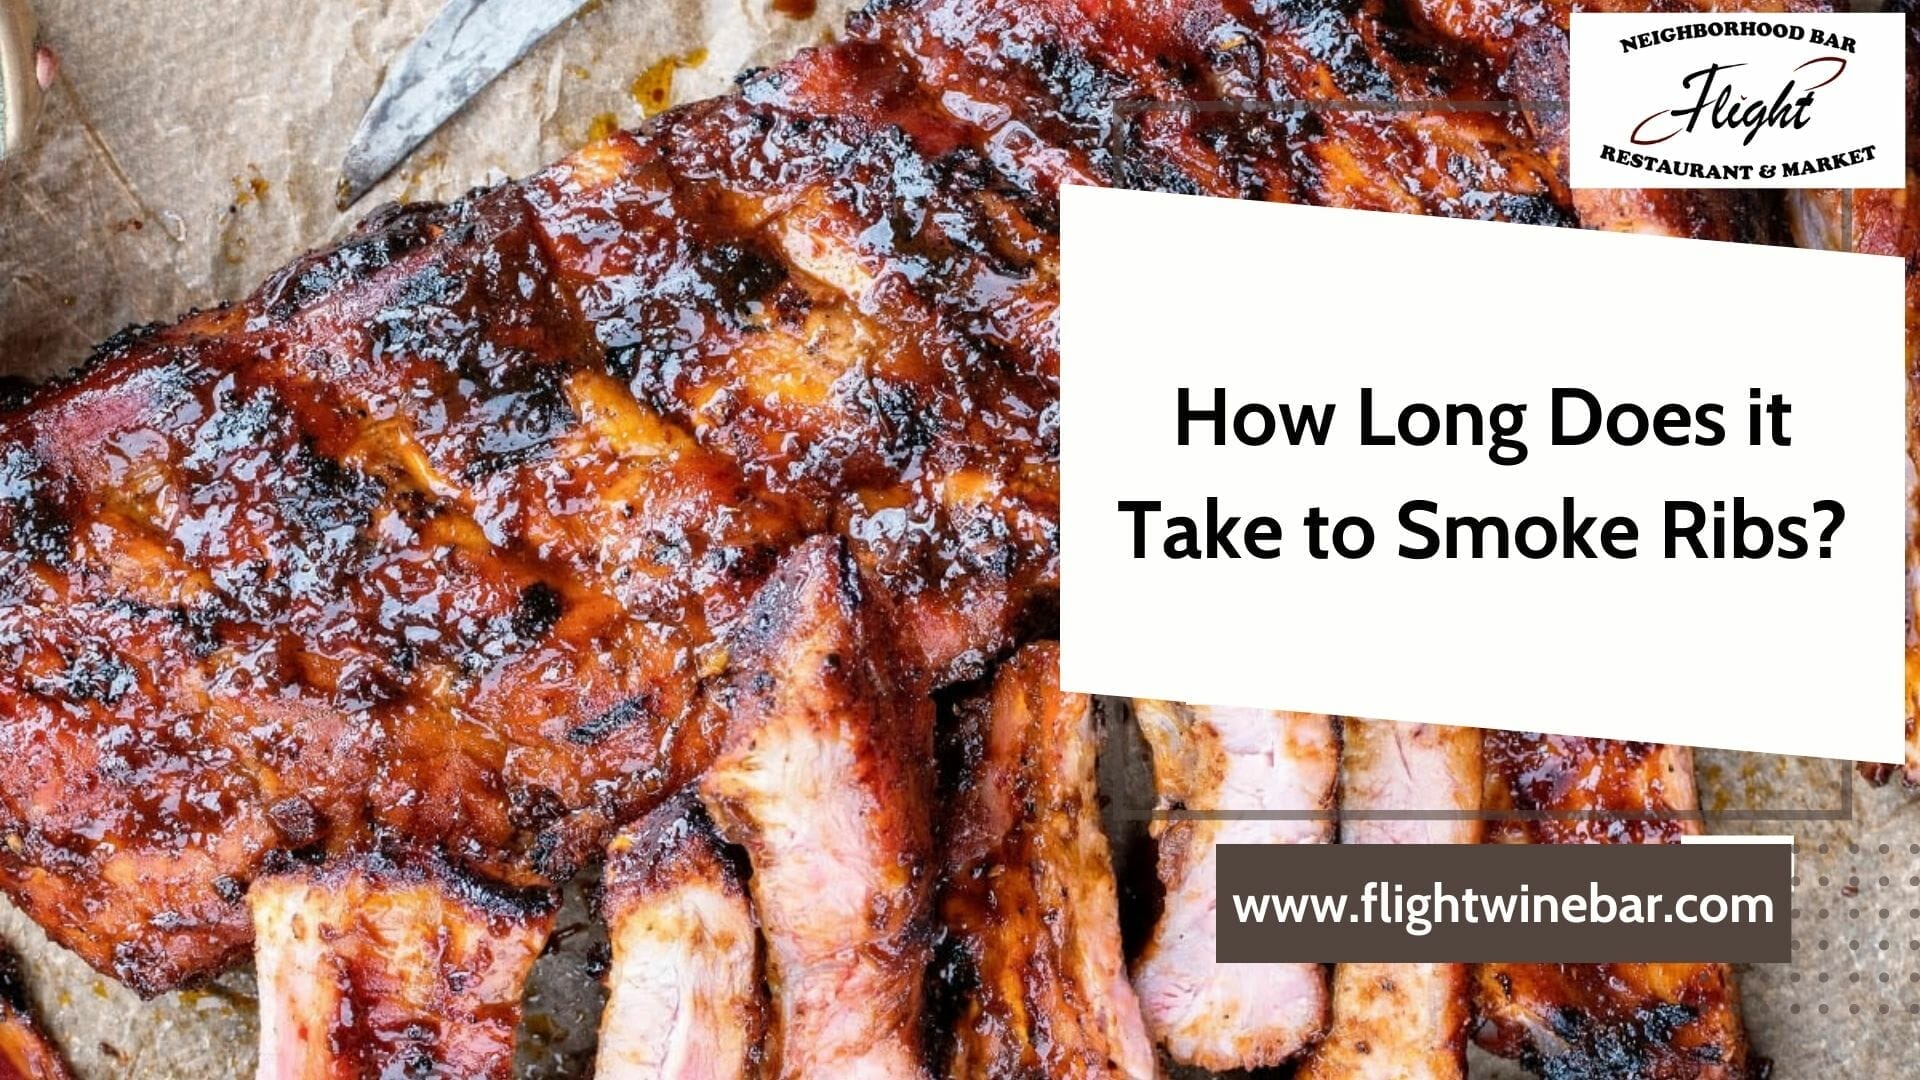 How Long Does it Take to Smoke Ribs